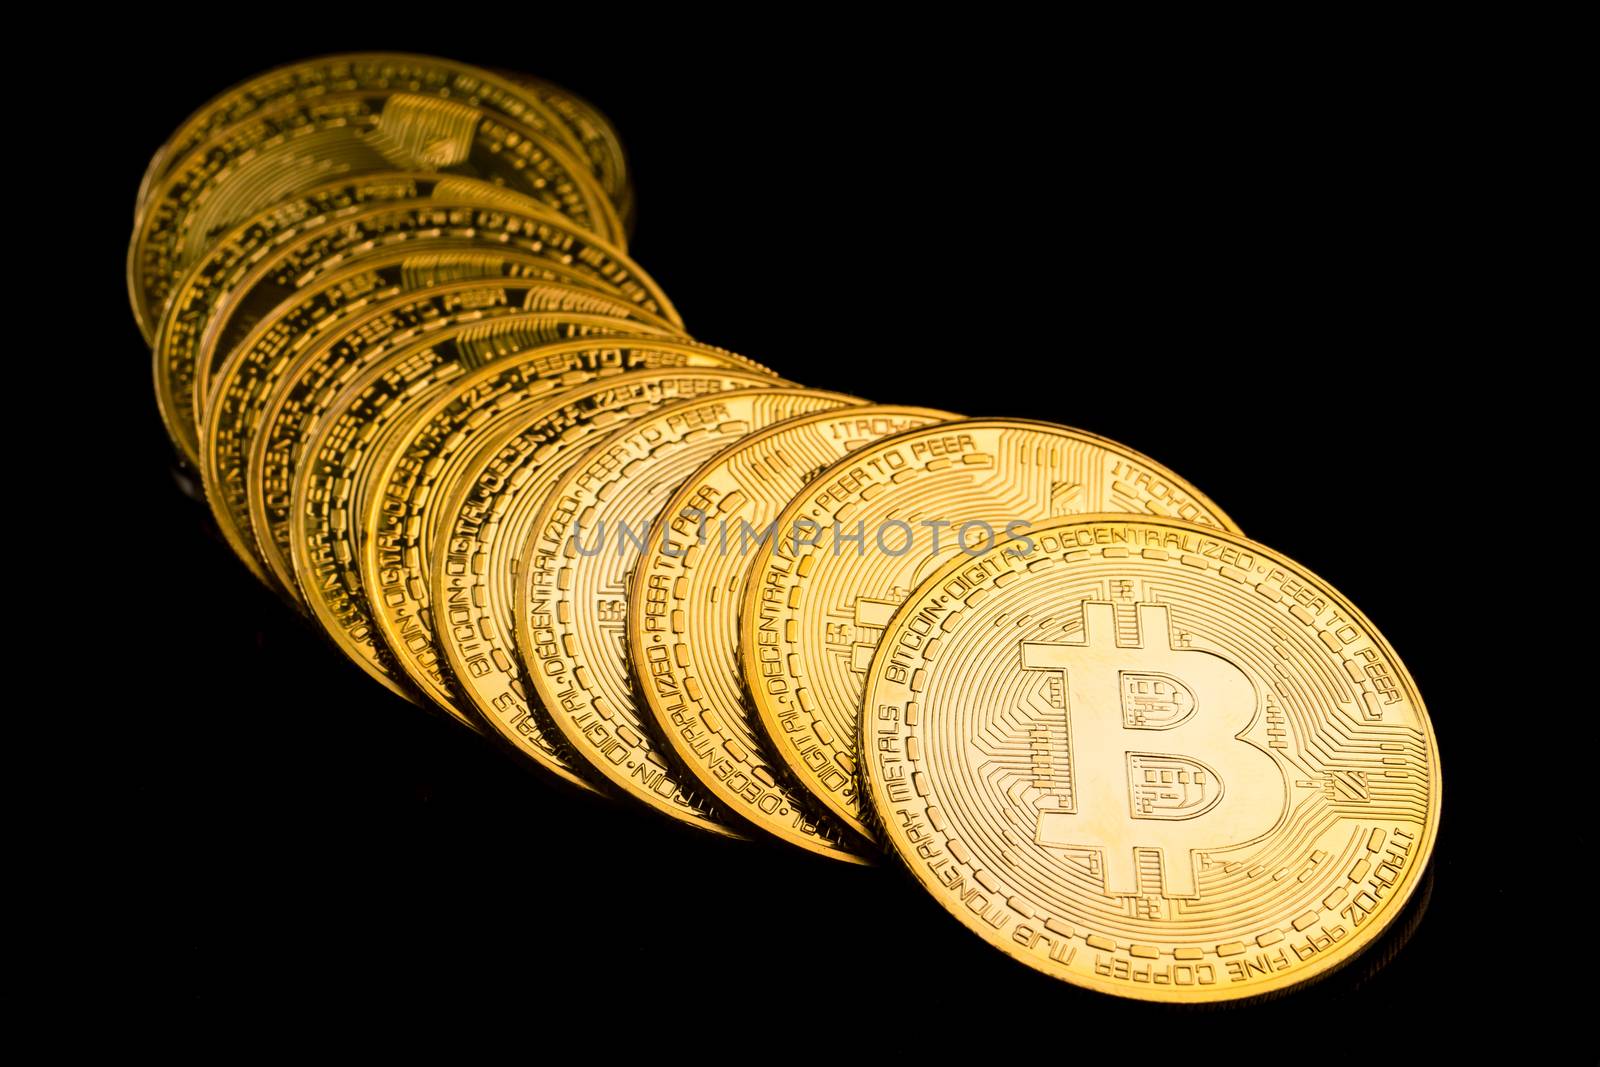 Golden coins with bitcoin symbol on a black background. by ronnarong